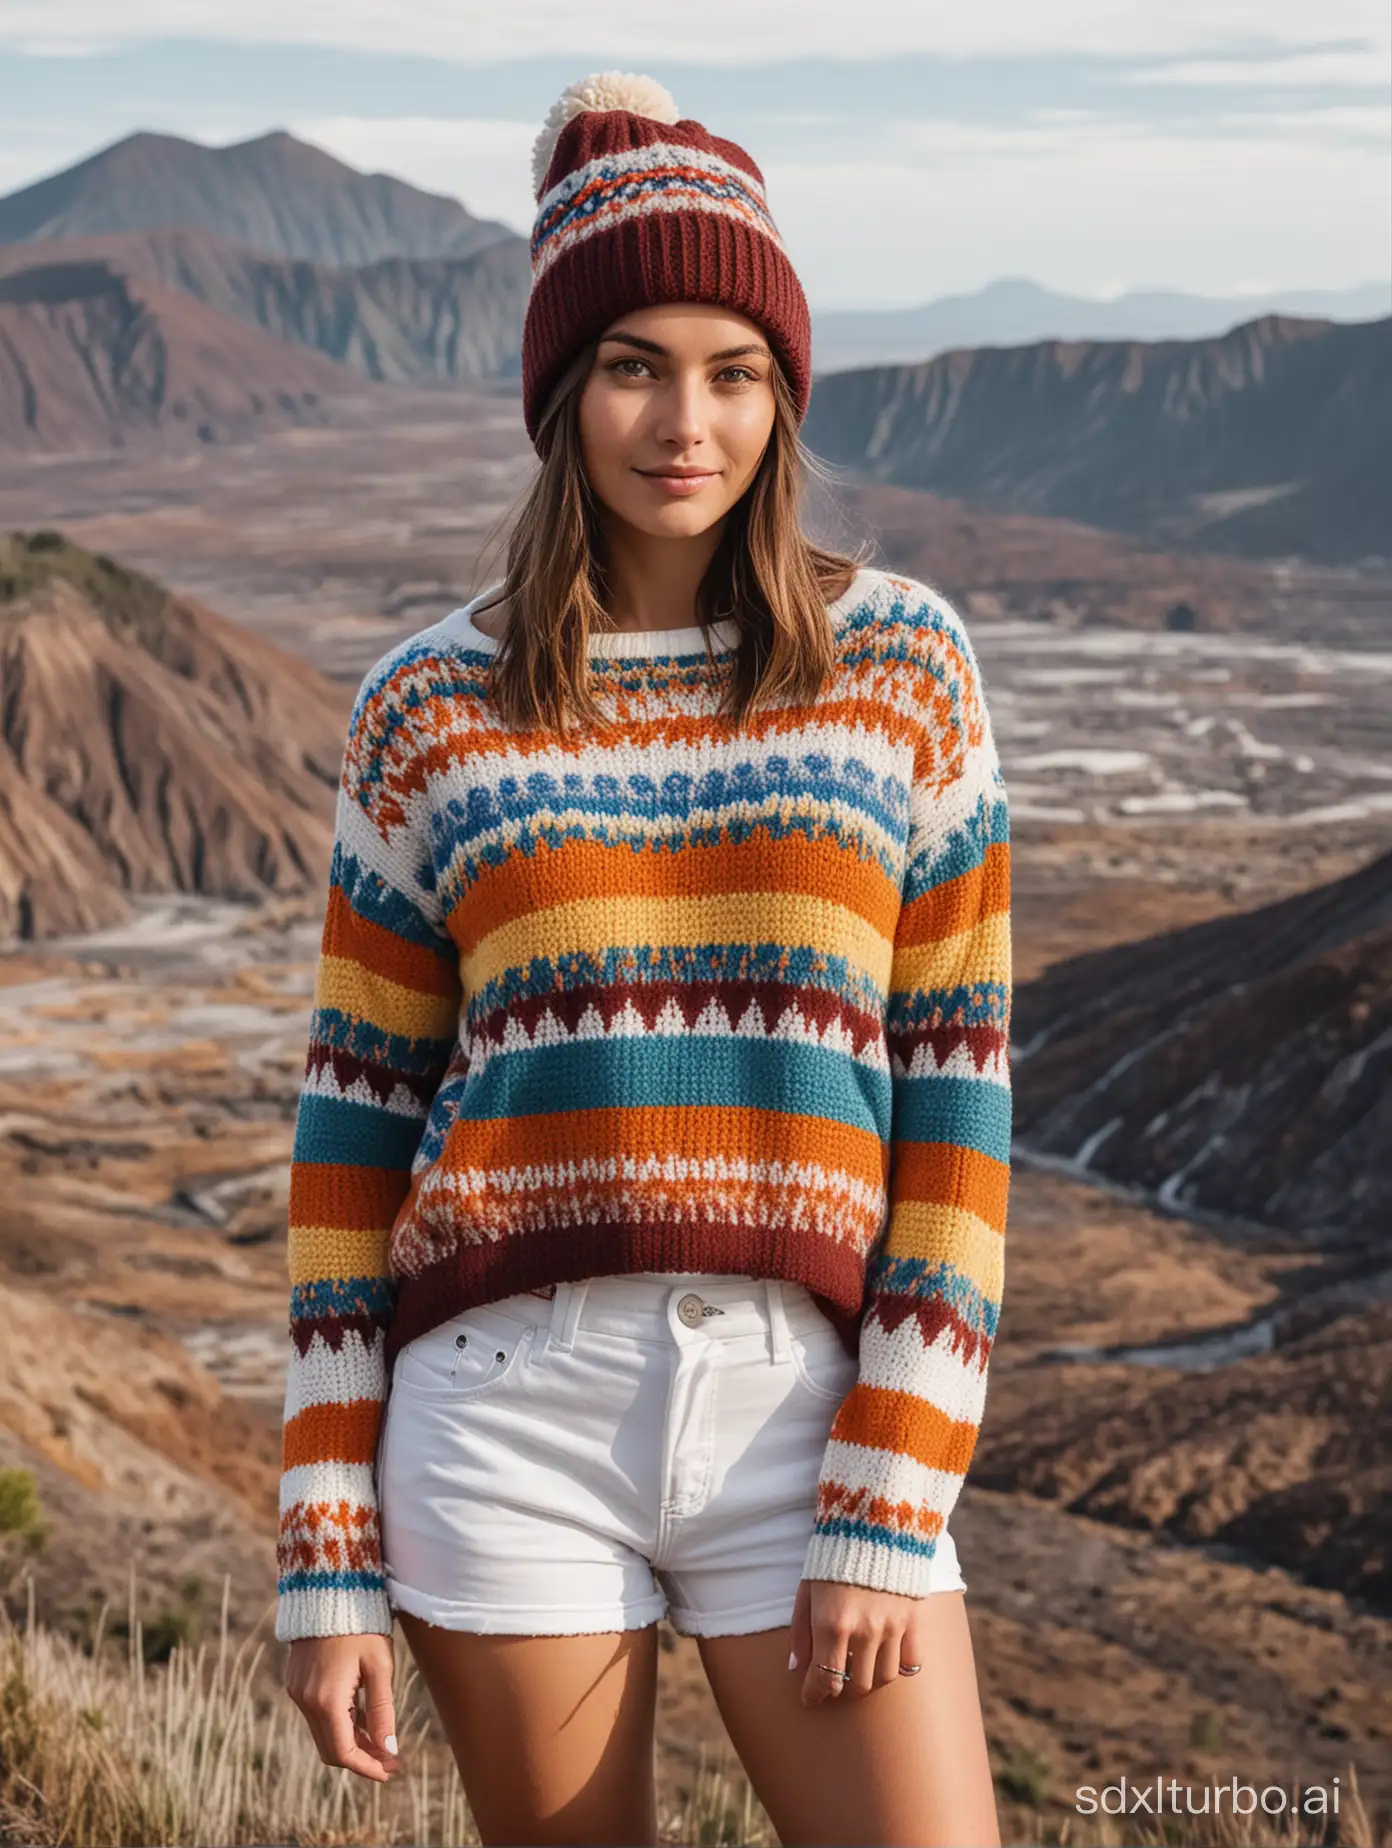 medium brown haired woman, slim body, small breast, wearing colorful oversized crotchet sweater, wearing a beanie, wearing a white short pants, wearing sneakers, standing on a higher ground, down below is mount Bromo as background